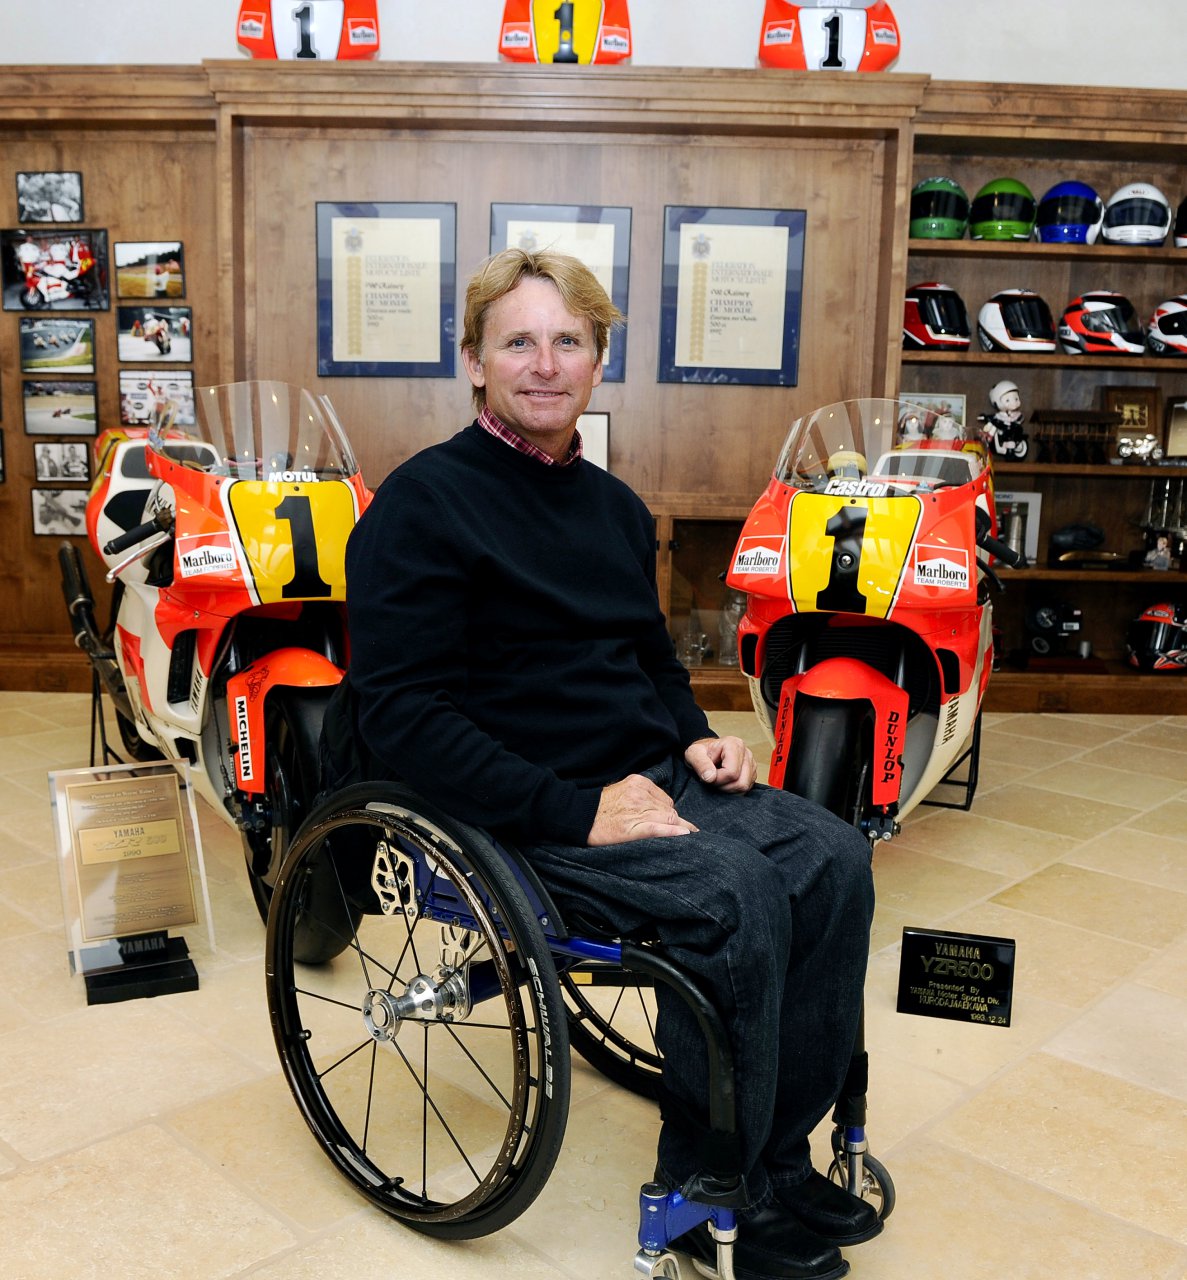 Goodwood, Wayne Rainey set to ride again at Goodwood Festival of Speed, ClassicCars.com Journal